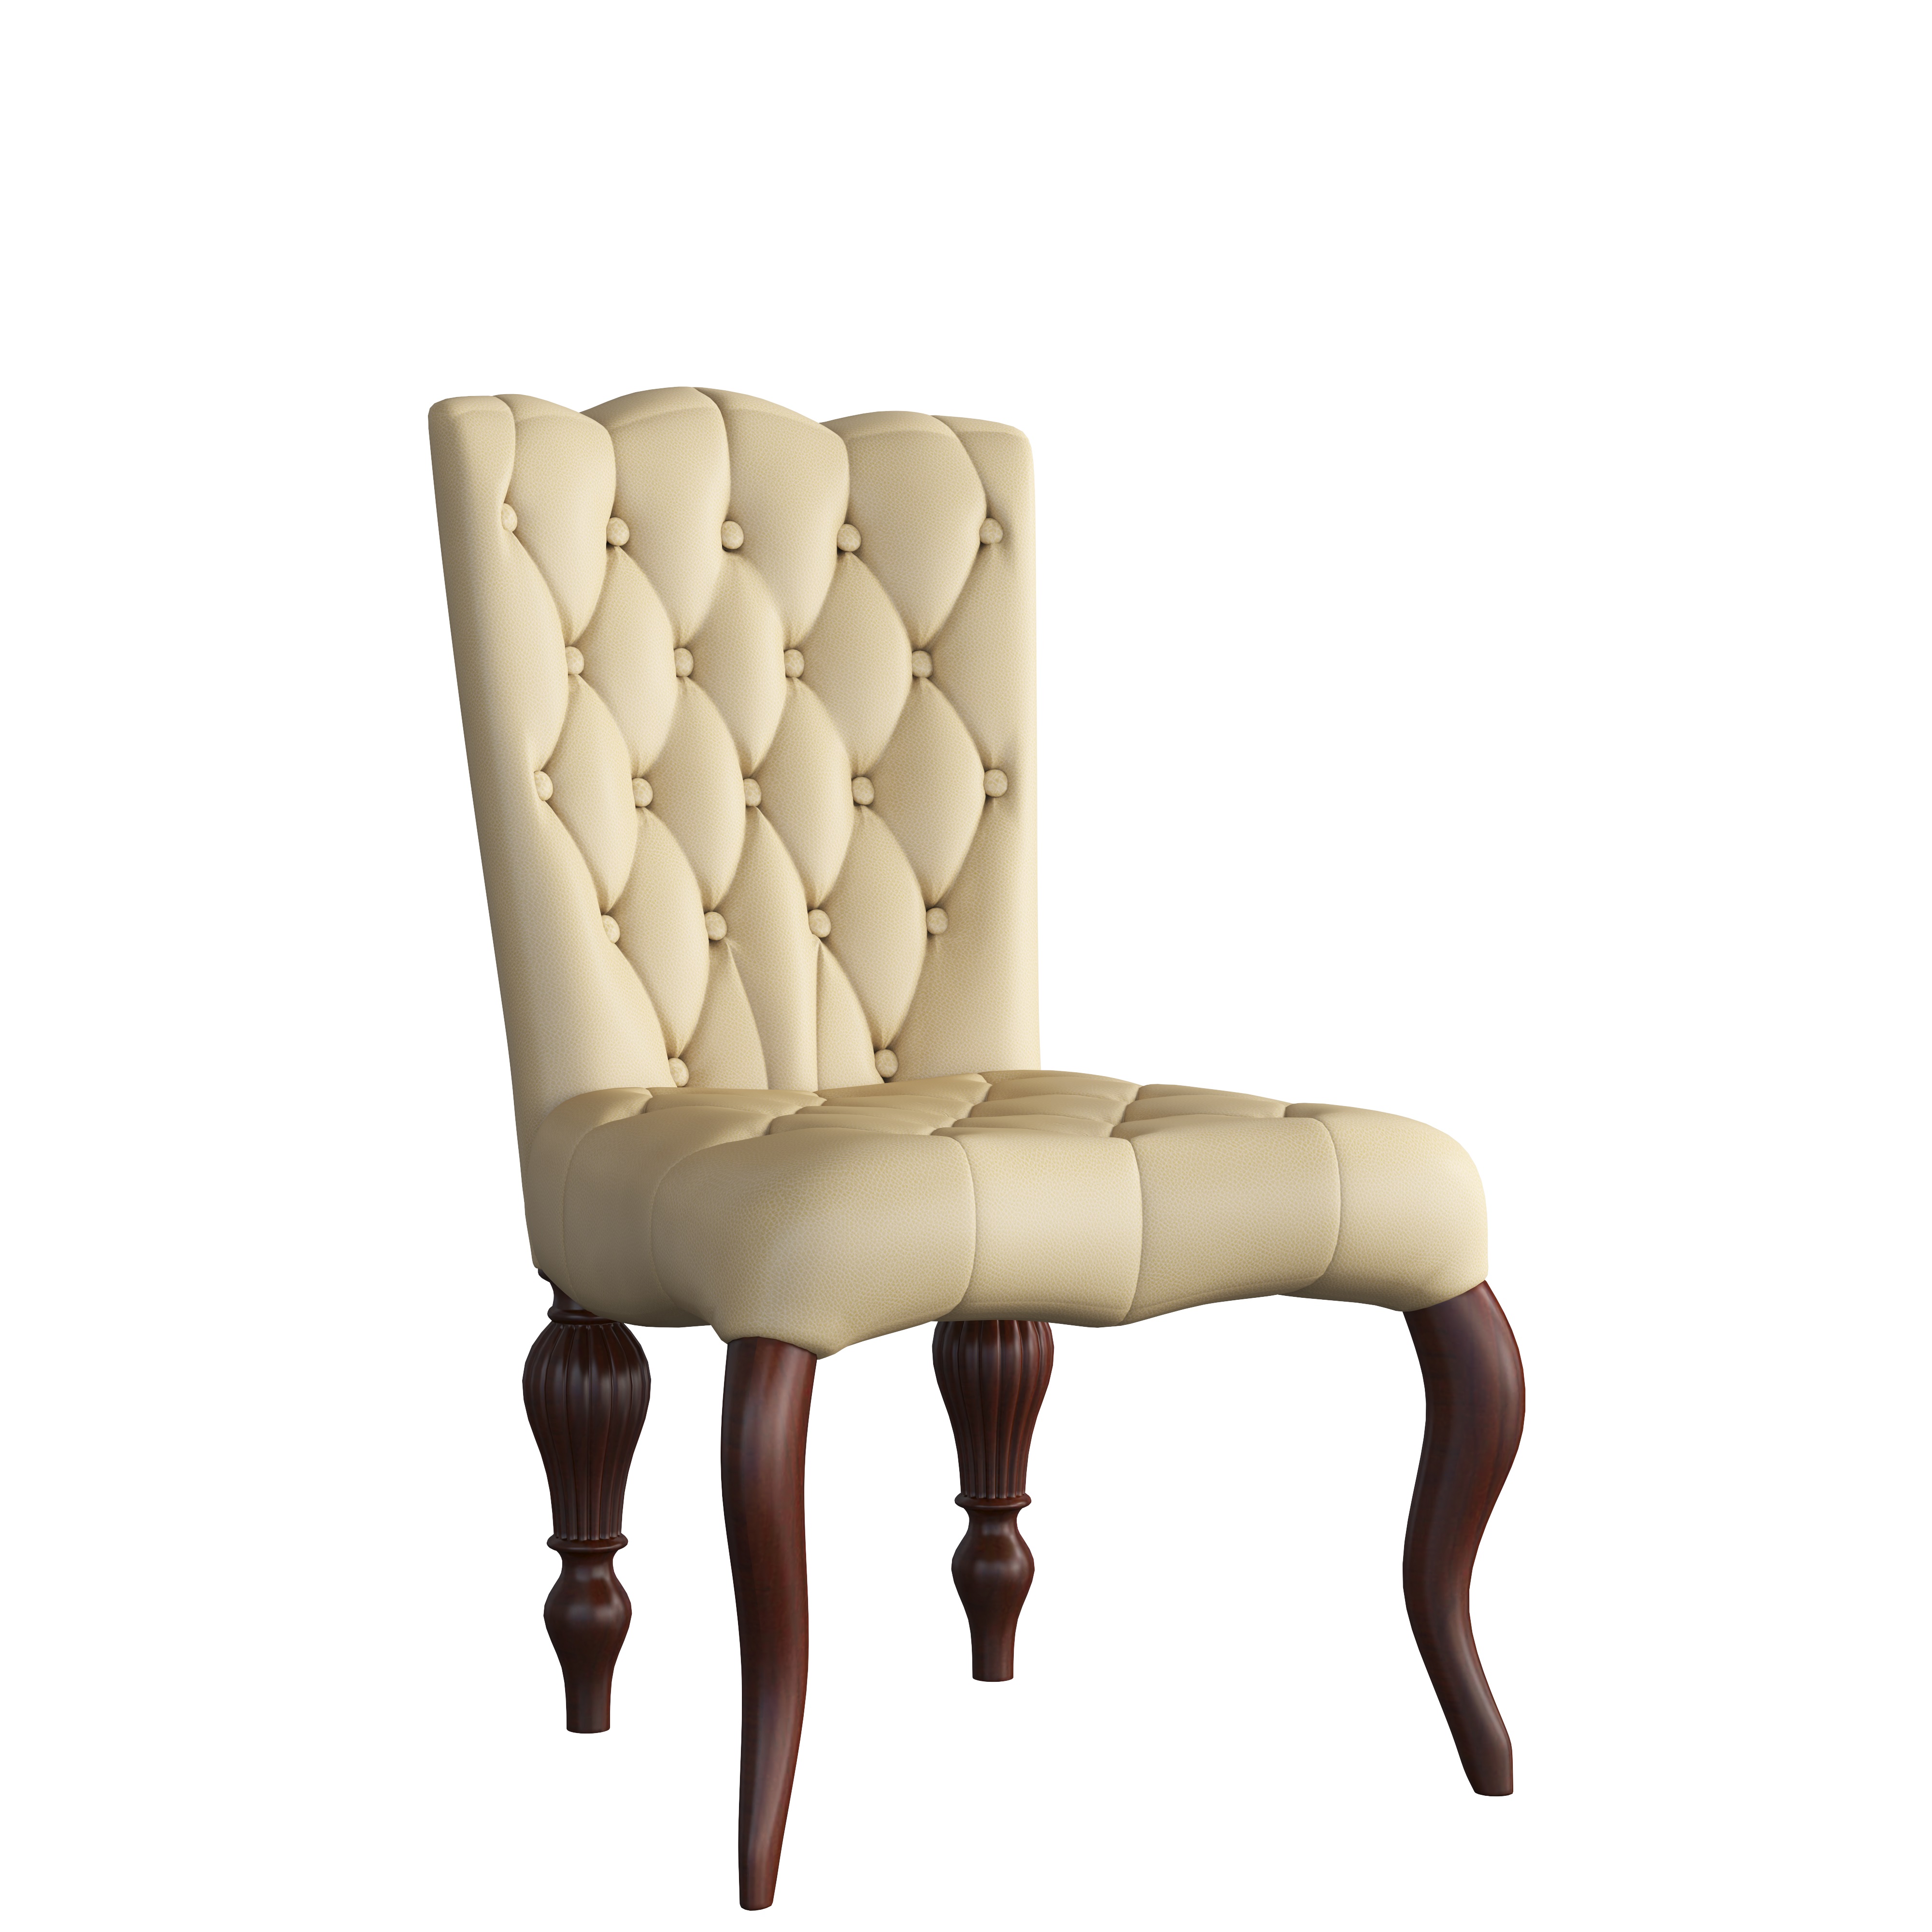 Classical mesh dining chair